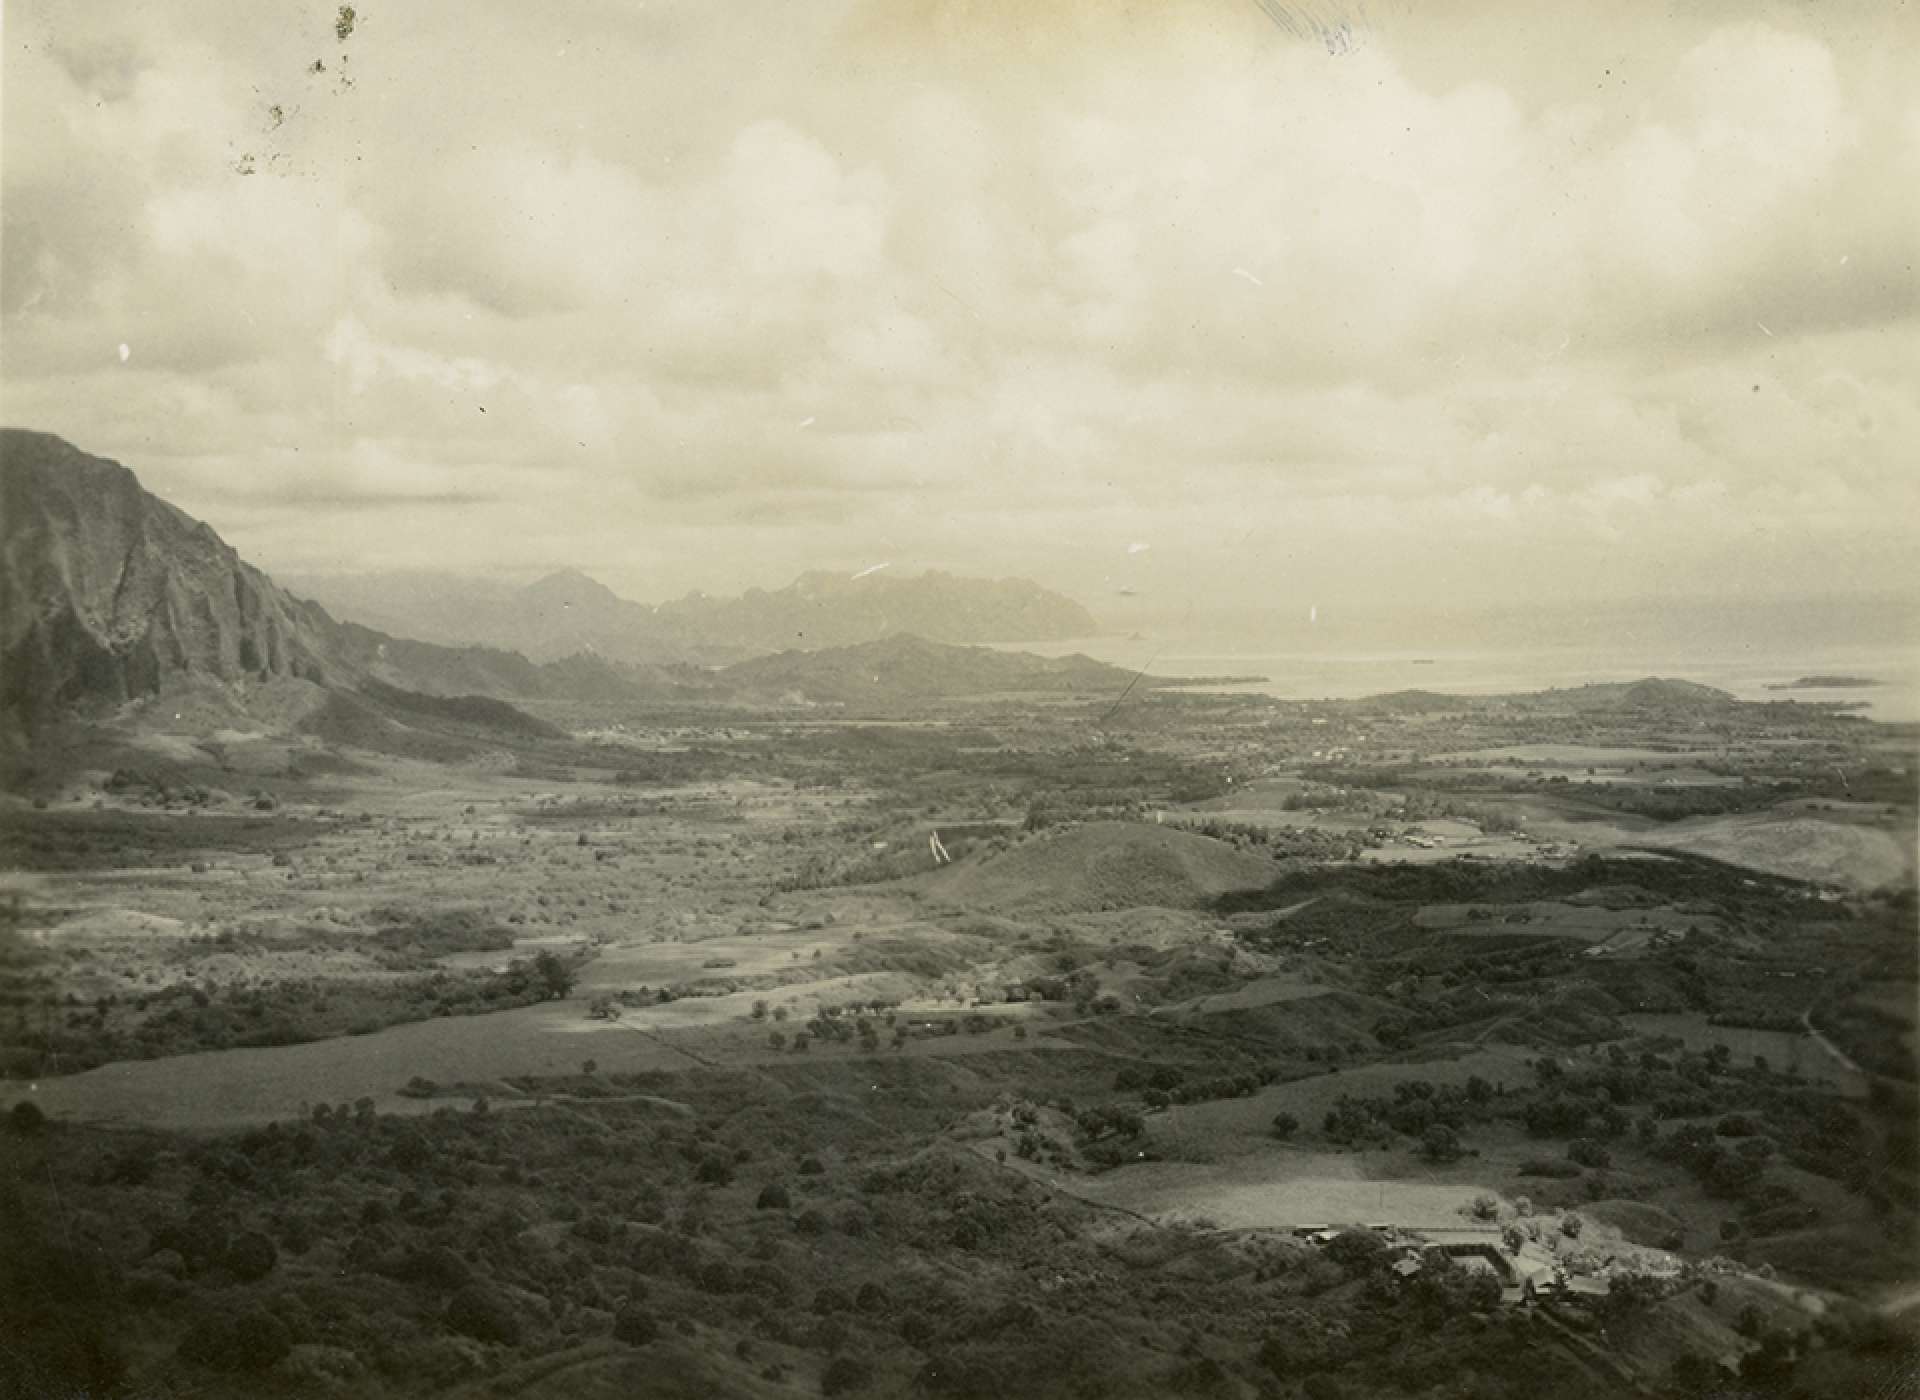 View from Pali Pass of the central valley on Oahu, 1945